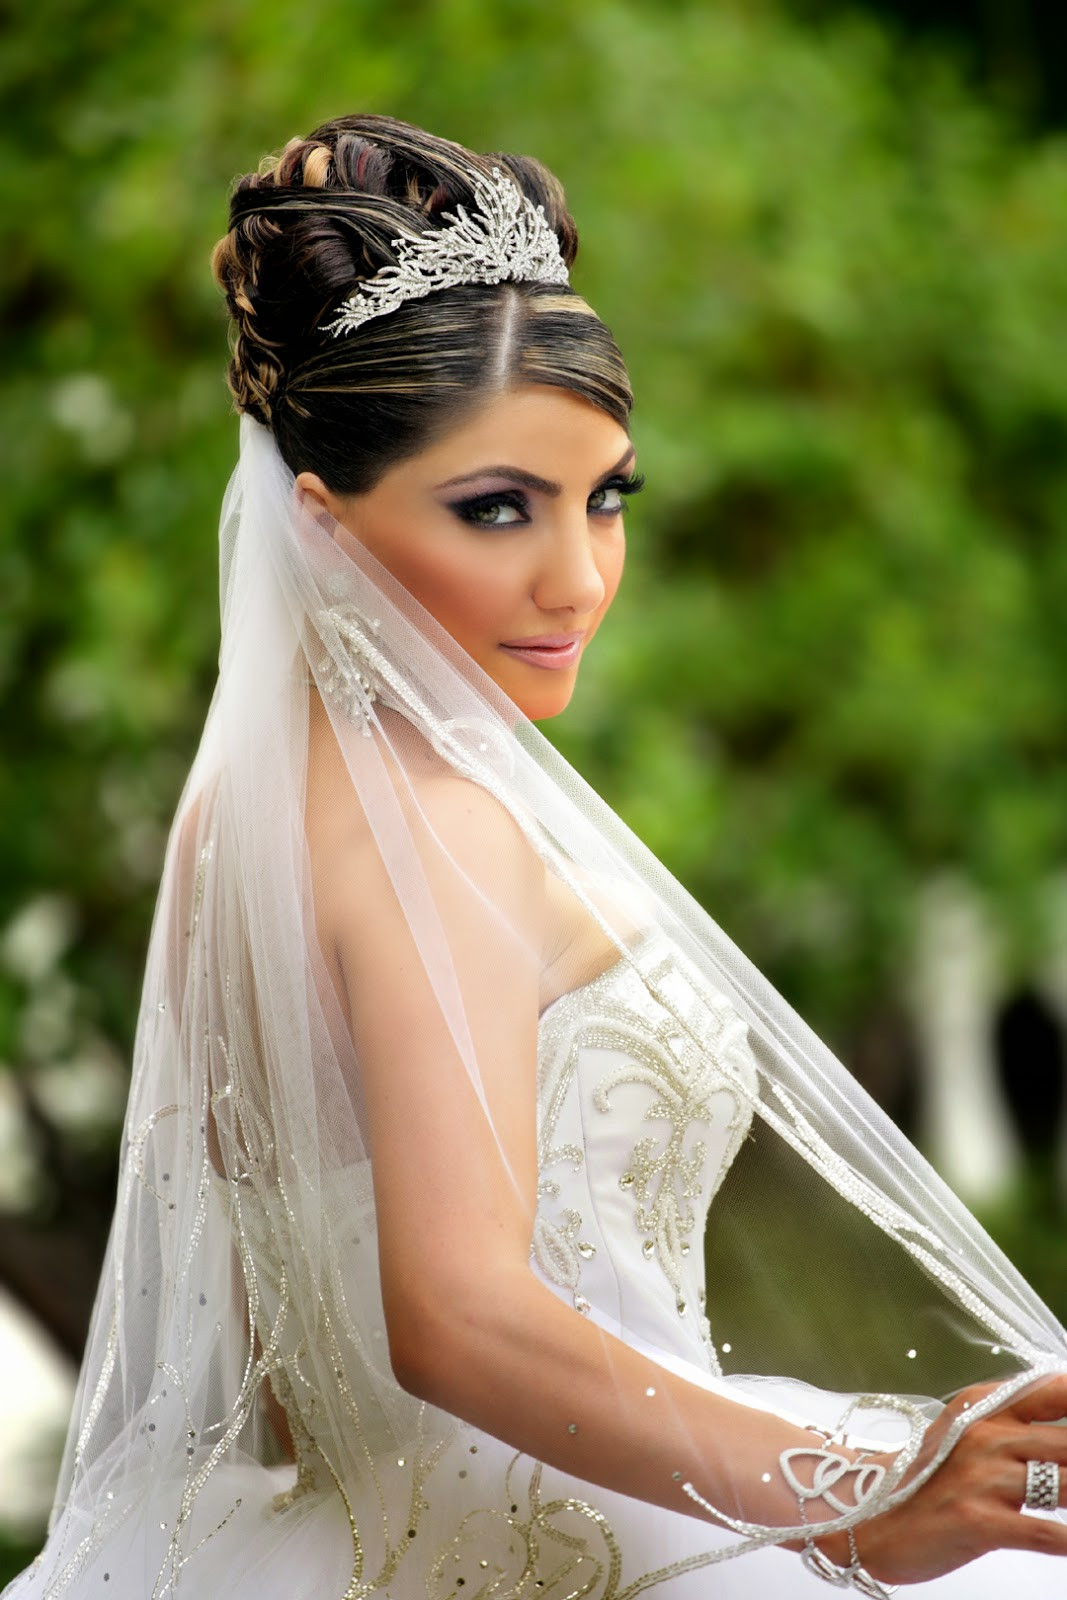 Hairstyles With Tiaras For Brides
 Wedding Hairstyles With Tiara 2014